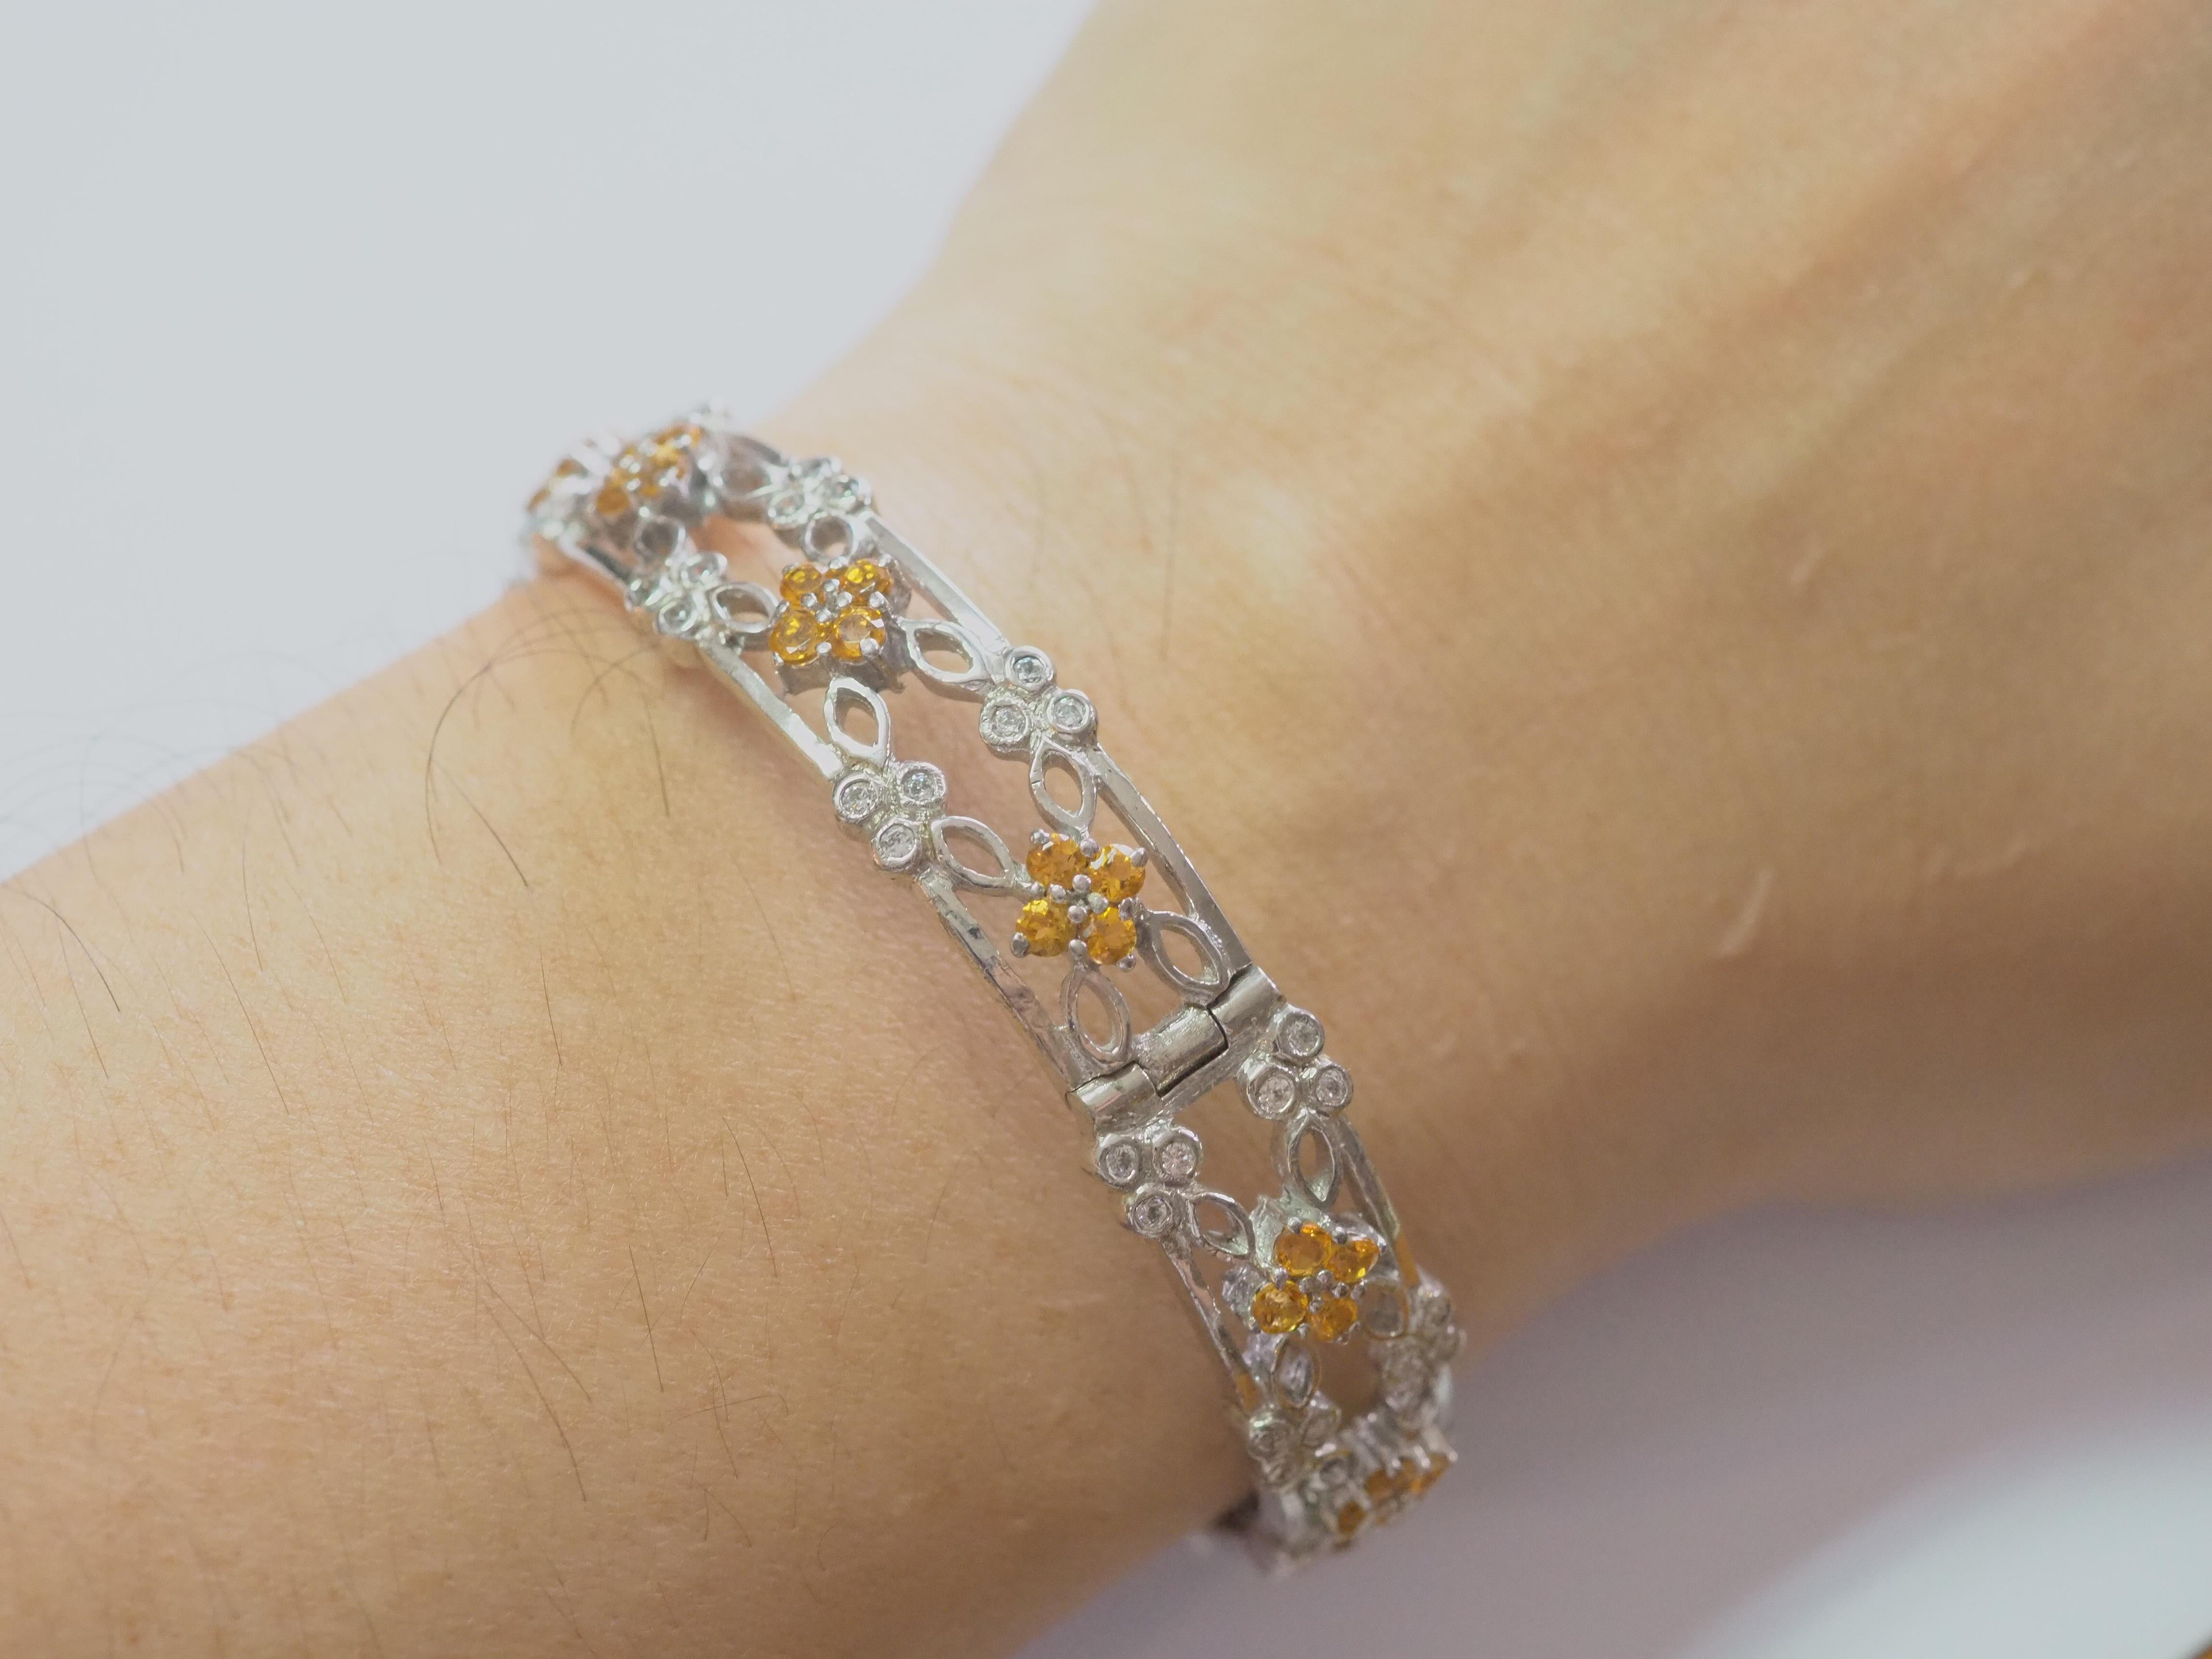 Flower Motif 3.50ct Citrine & CZ Sterling Silver Bangle Bracelet, 6.7cm Diameter In Excellent Condition For Sale In เกาะสมุย, TH